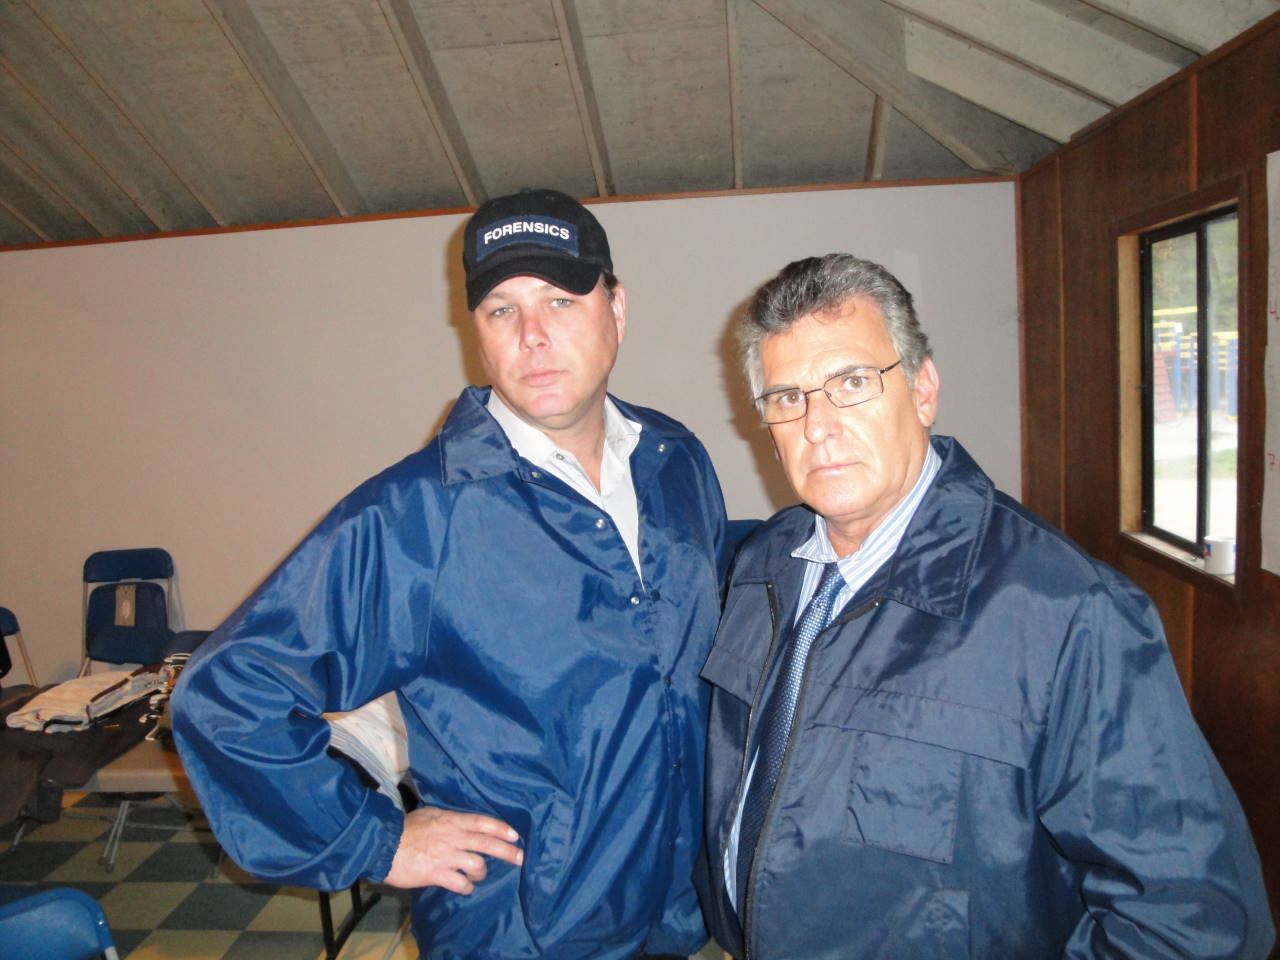 Forensic Officer Randy Brown and Police Detective Wayne Johnson on the set of Cottage Country, Whizbang Films